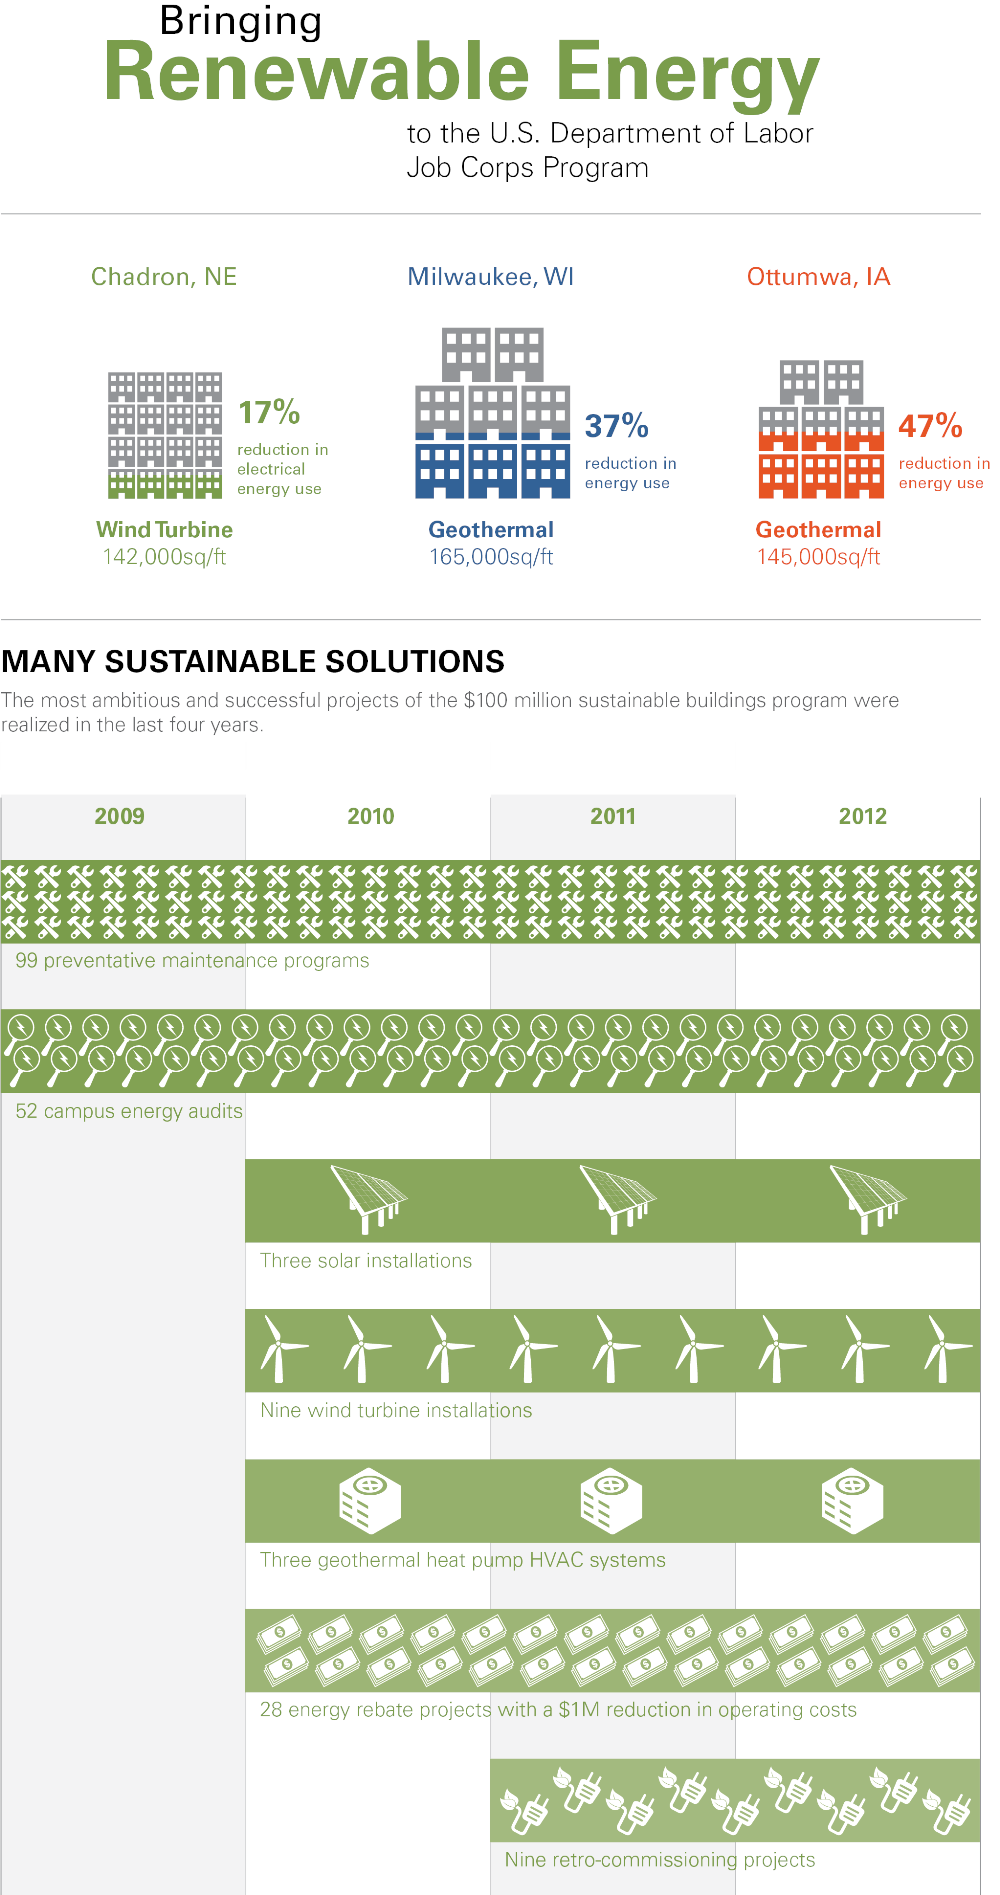 Bringing Sustainability to the Job Corps Blog Infographic